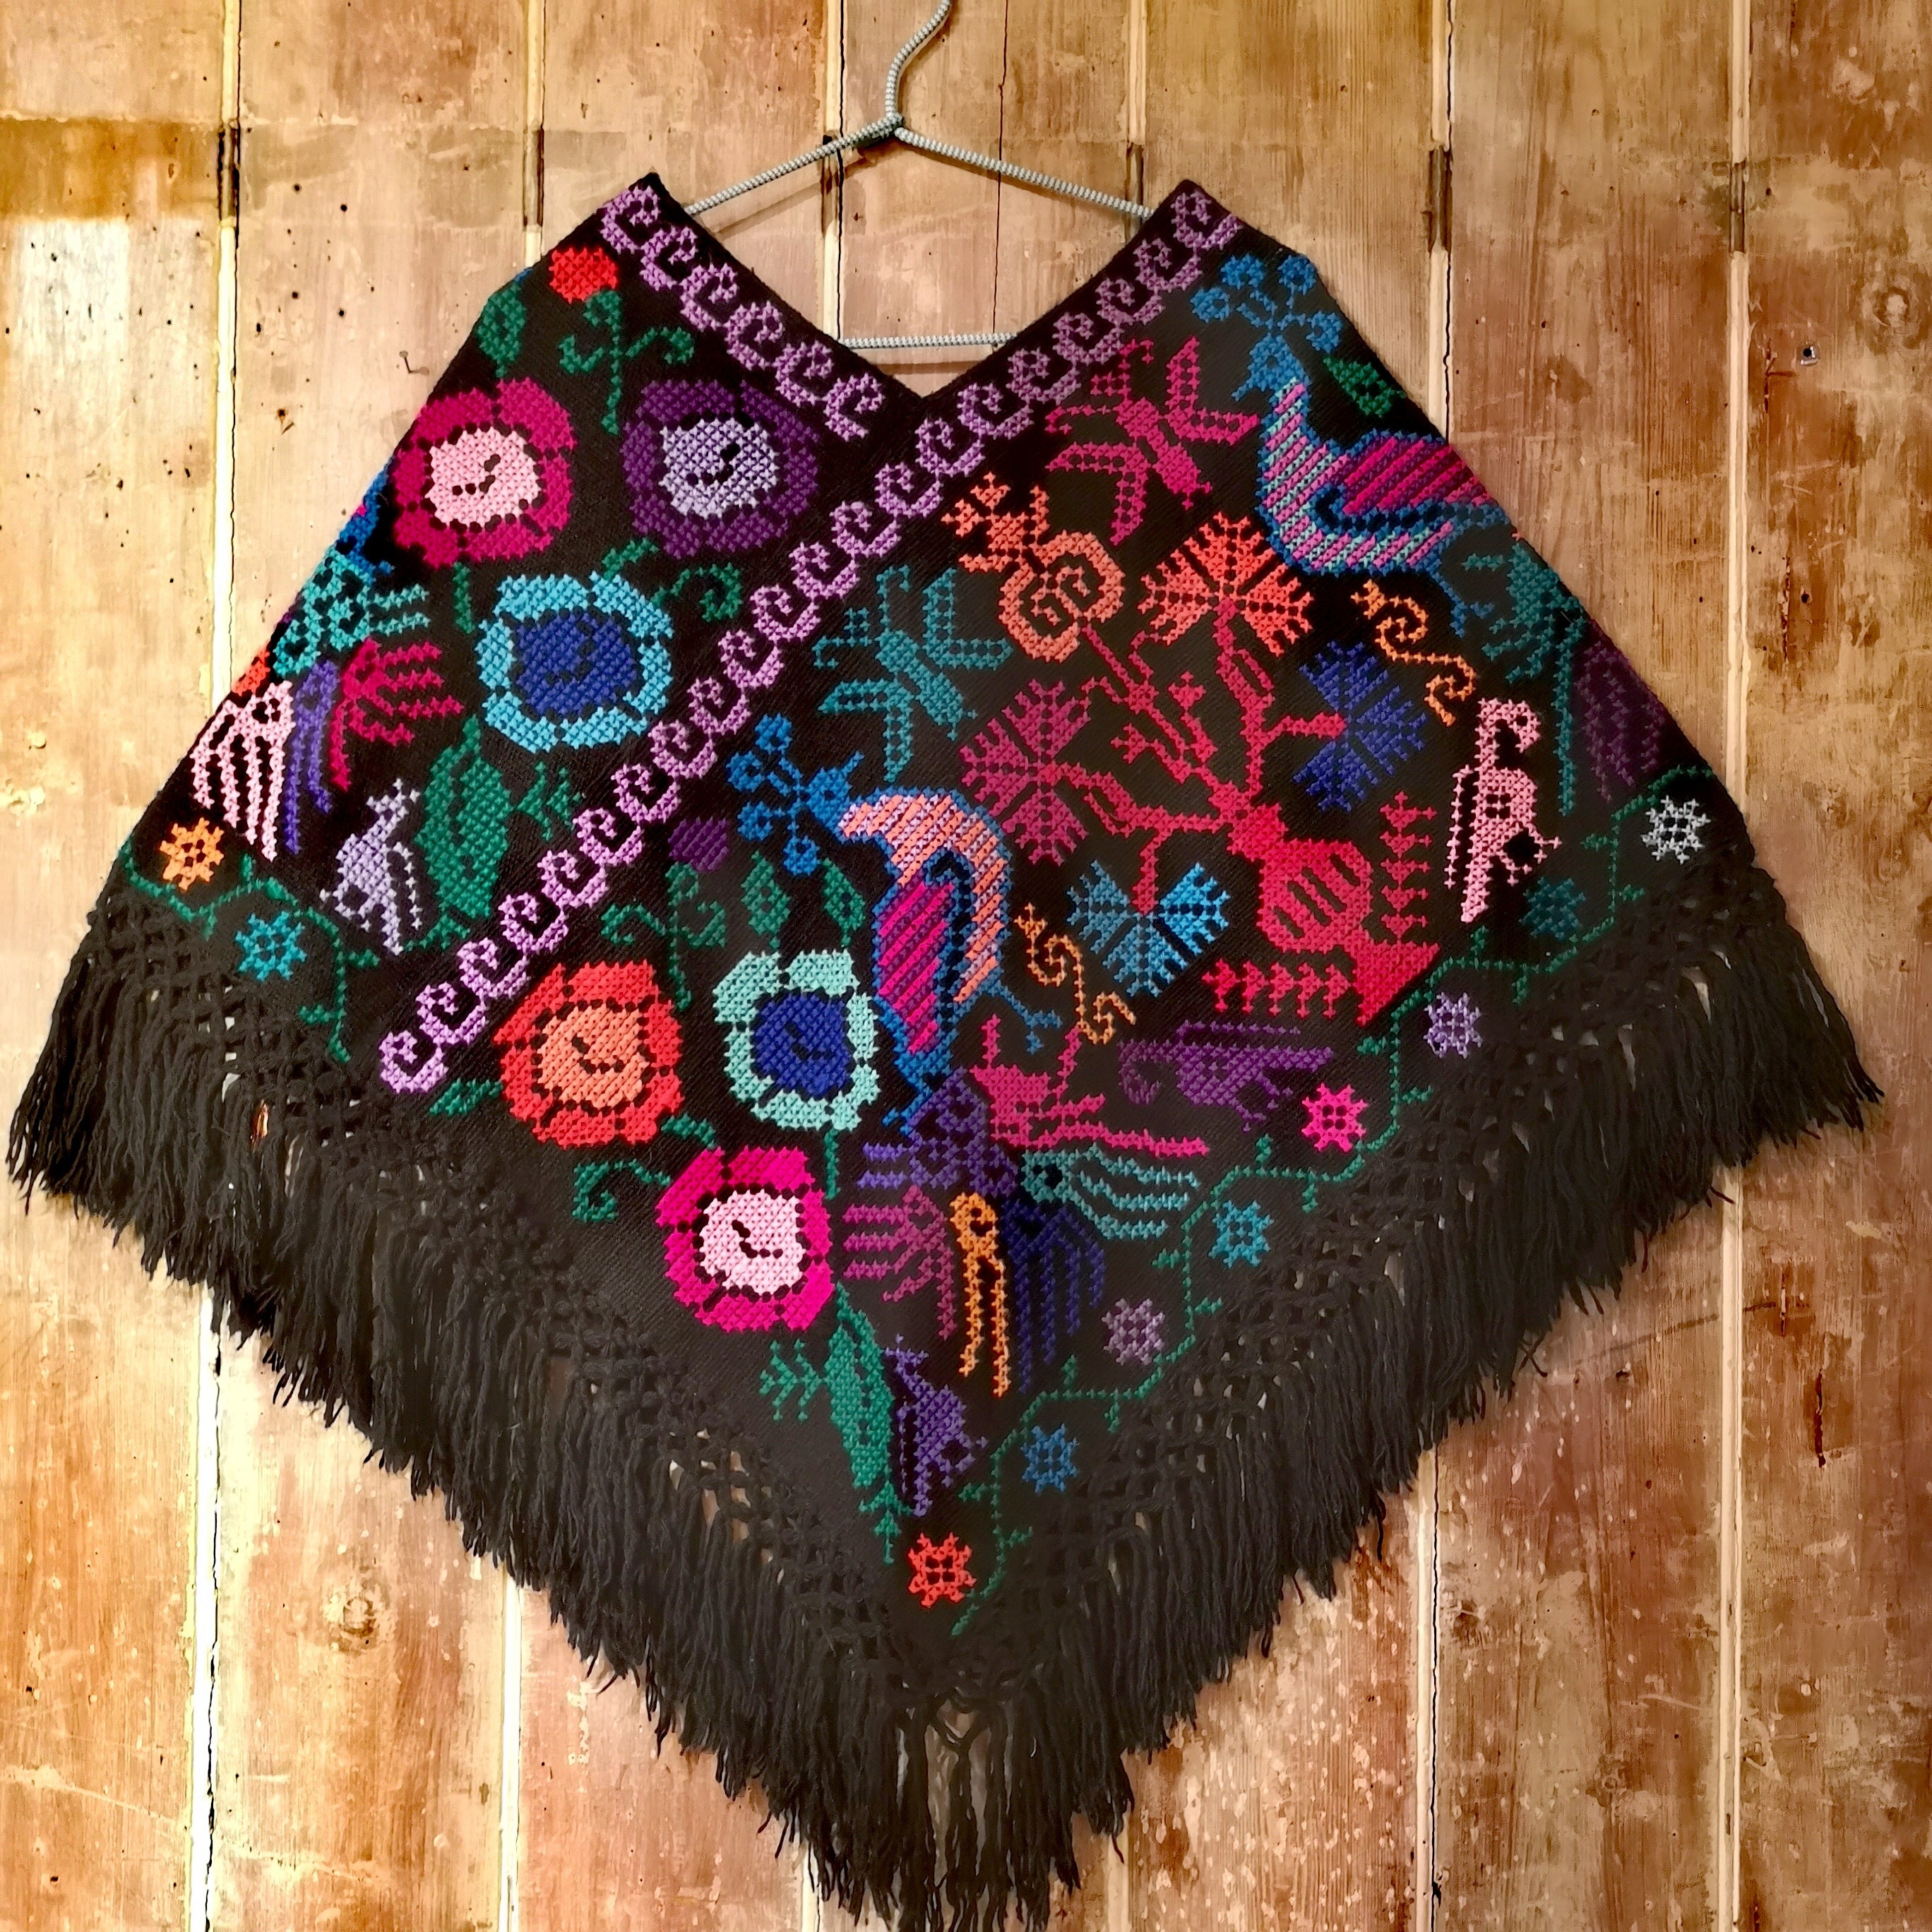 Add an extra gorgeous folky layer of warmth with these traditional hand stitched flora and flora designs on beautiful easy wear cotton ponchos. These are made by hand in the Mexican area of Hidalgo.

One size

Cotton poncho with acrylic stitching

Shoulder to midpoint measures 70cm

Washable at 30 degrees,dry naturally. 

